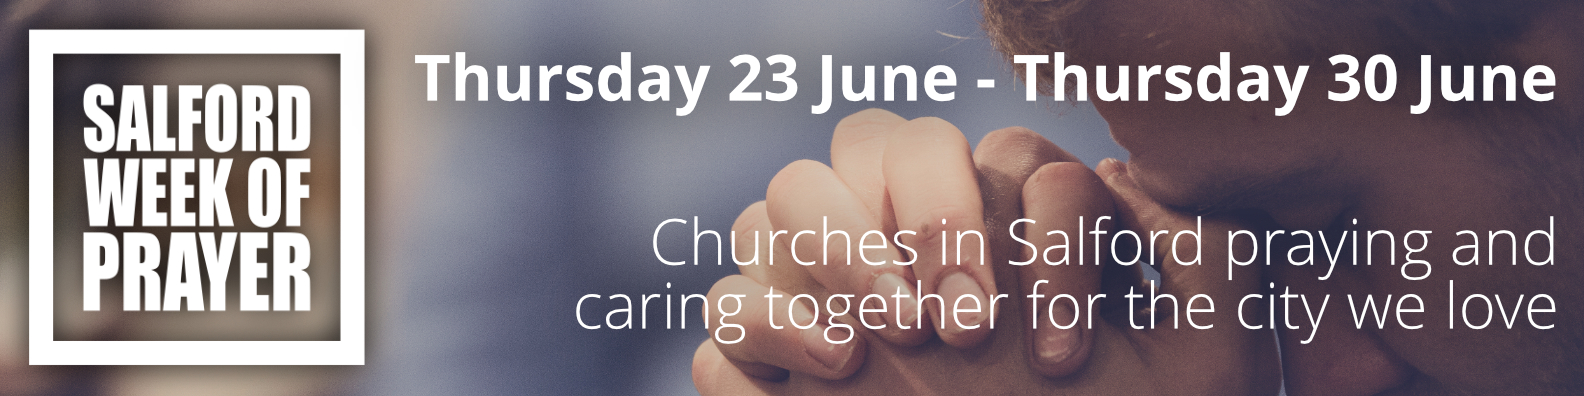 Salford Week of Prayer | Thursday 23 June - Thursday 30 June | Churches in Salford praying and caring together for the city we love